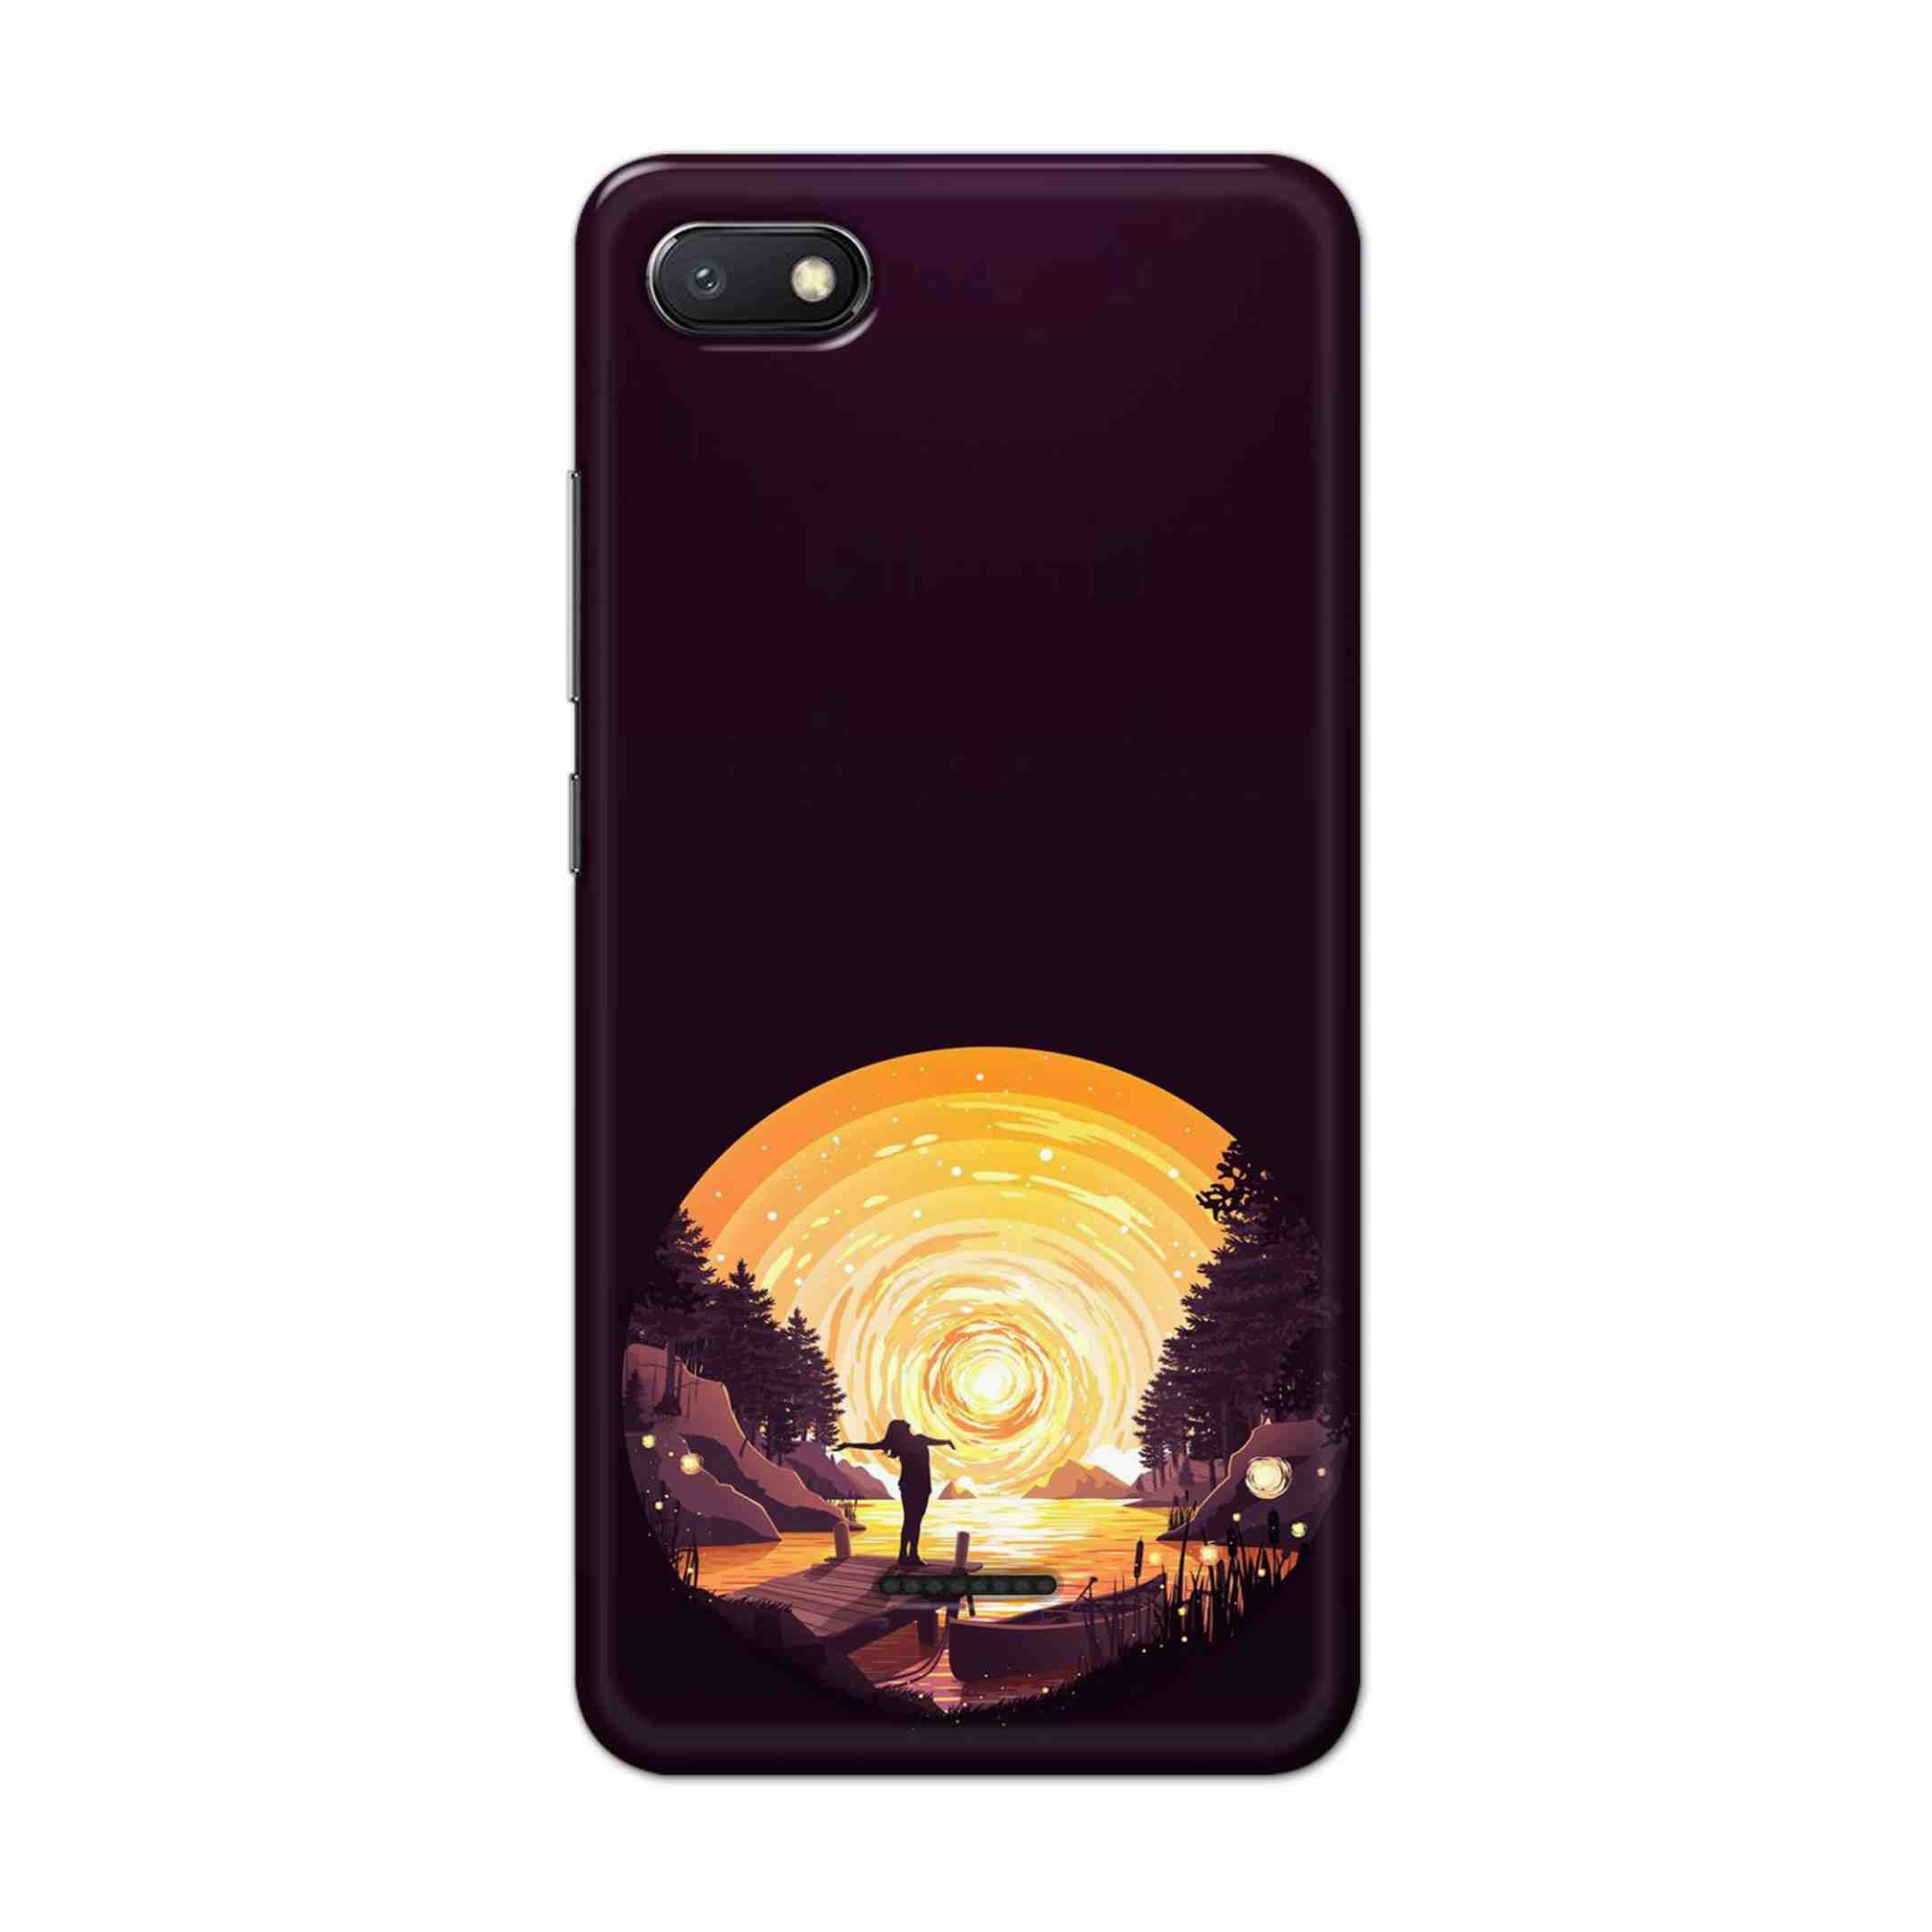 Buy Night Sunrise Hard Back Mobile Phone Case/Cover For Xiaomi Redmi 6A Online